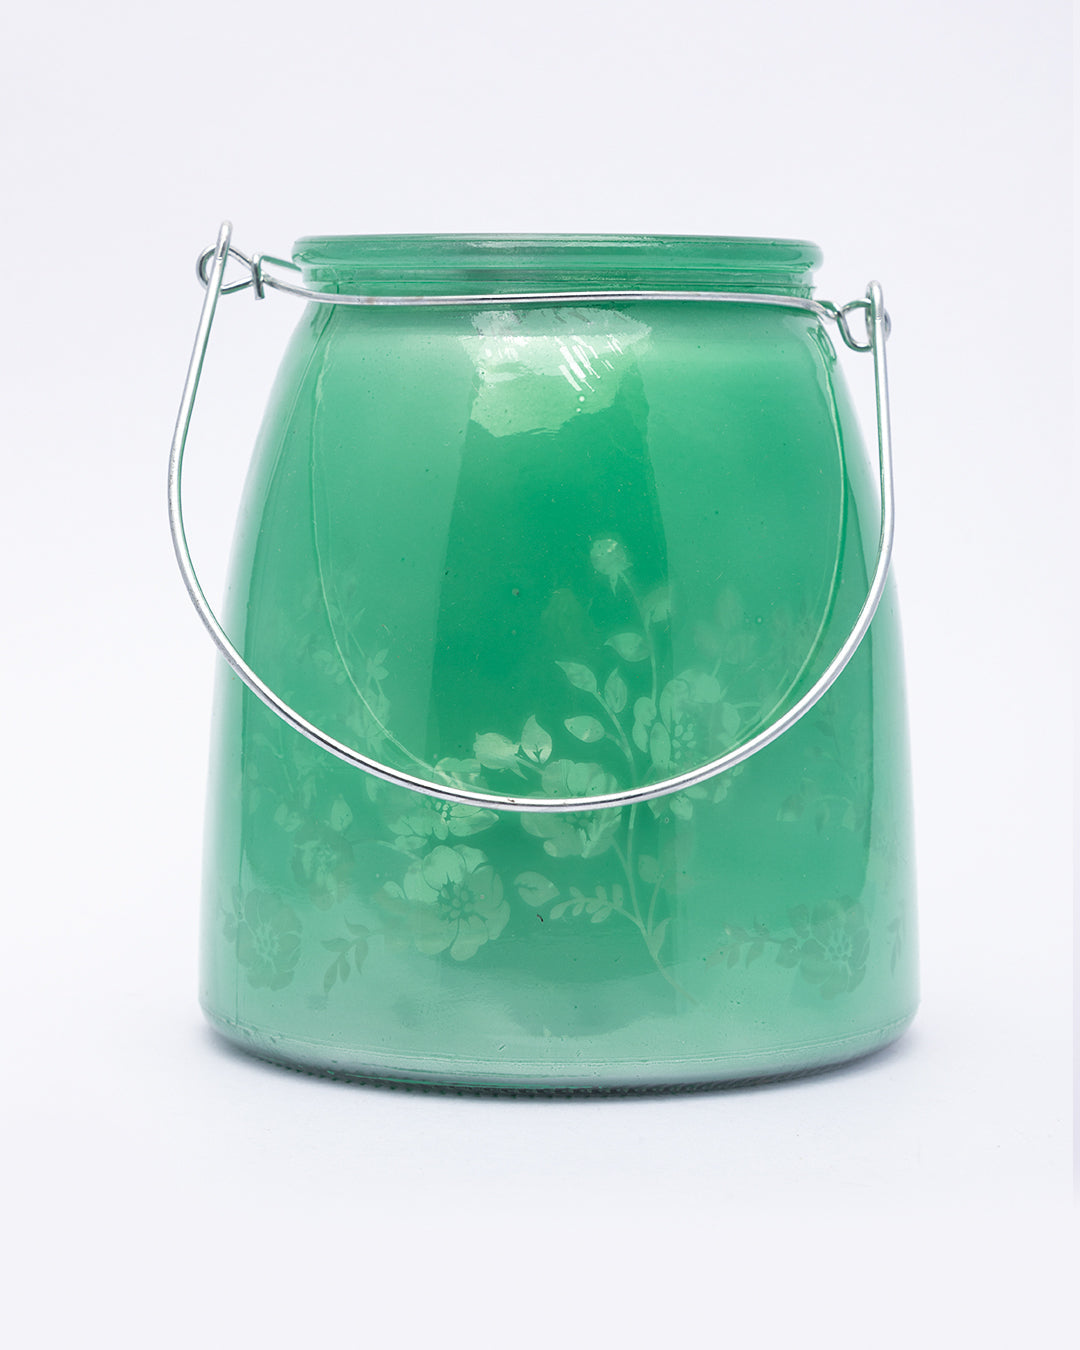 VON CASA Glass T-Light Holder, for Table, Hanging, Indoor & Outdoor Decor, Green, Glass